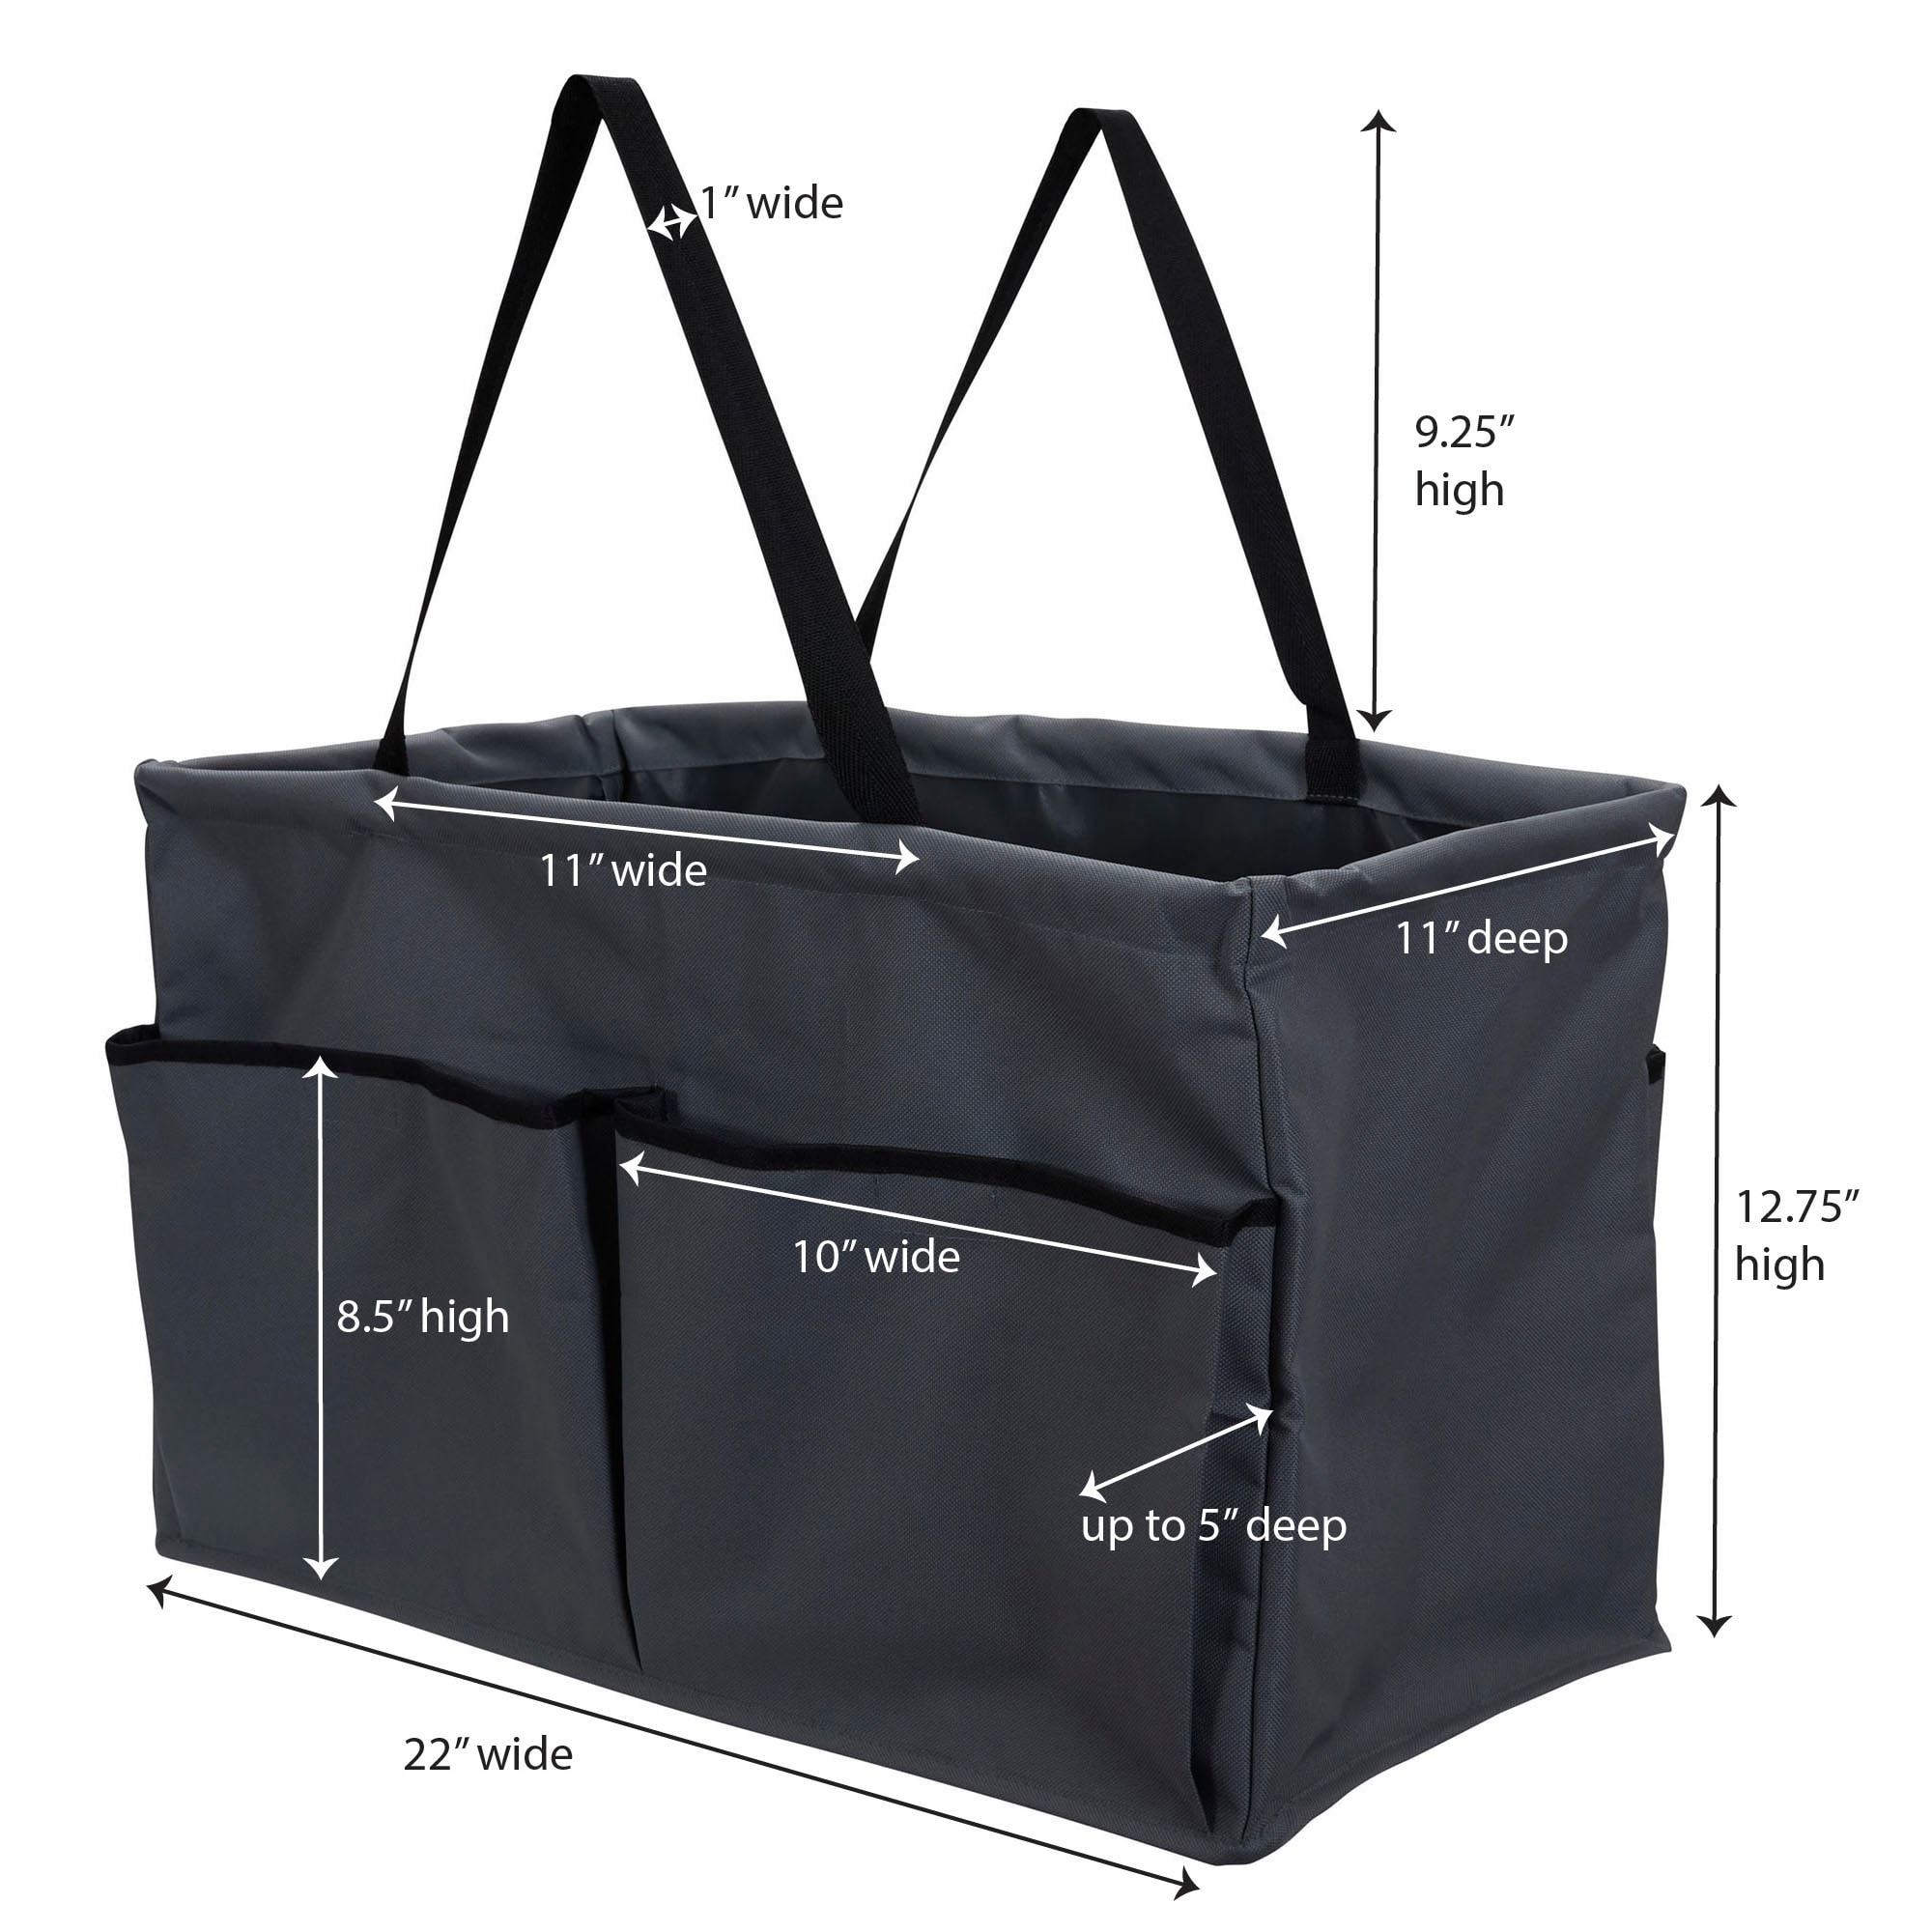 https://ak1.ostkcdn.com/images/products/is/images/direct/25ff2edc4b395ee884463dbfe1774bb22f5d05d7/All-Purpose-Water-Resistant-Canvas-Utility-Tote.jpg